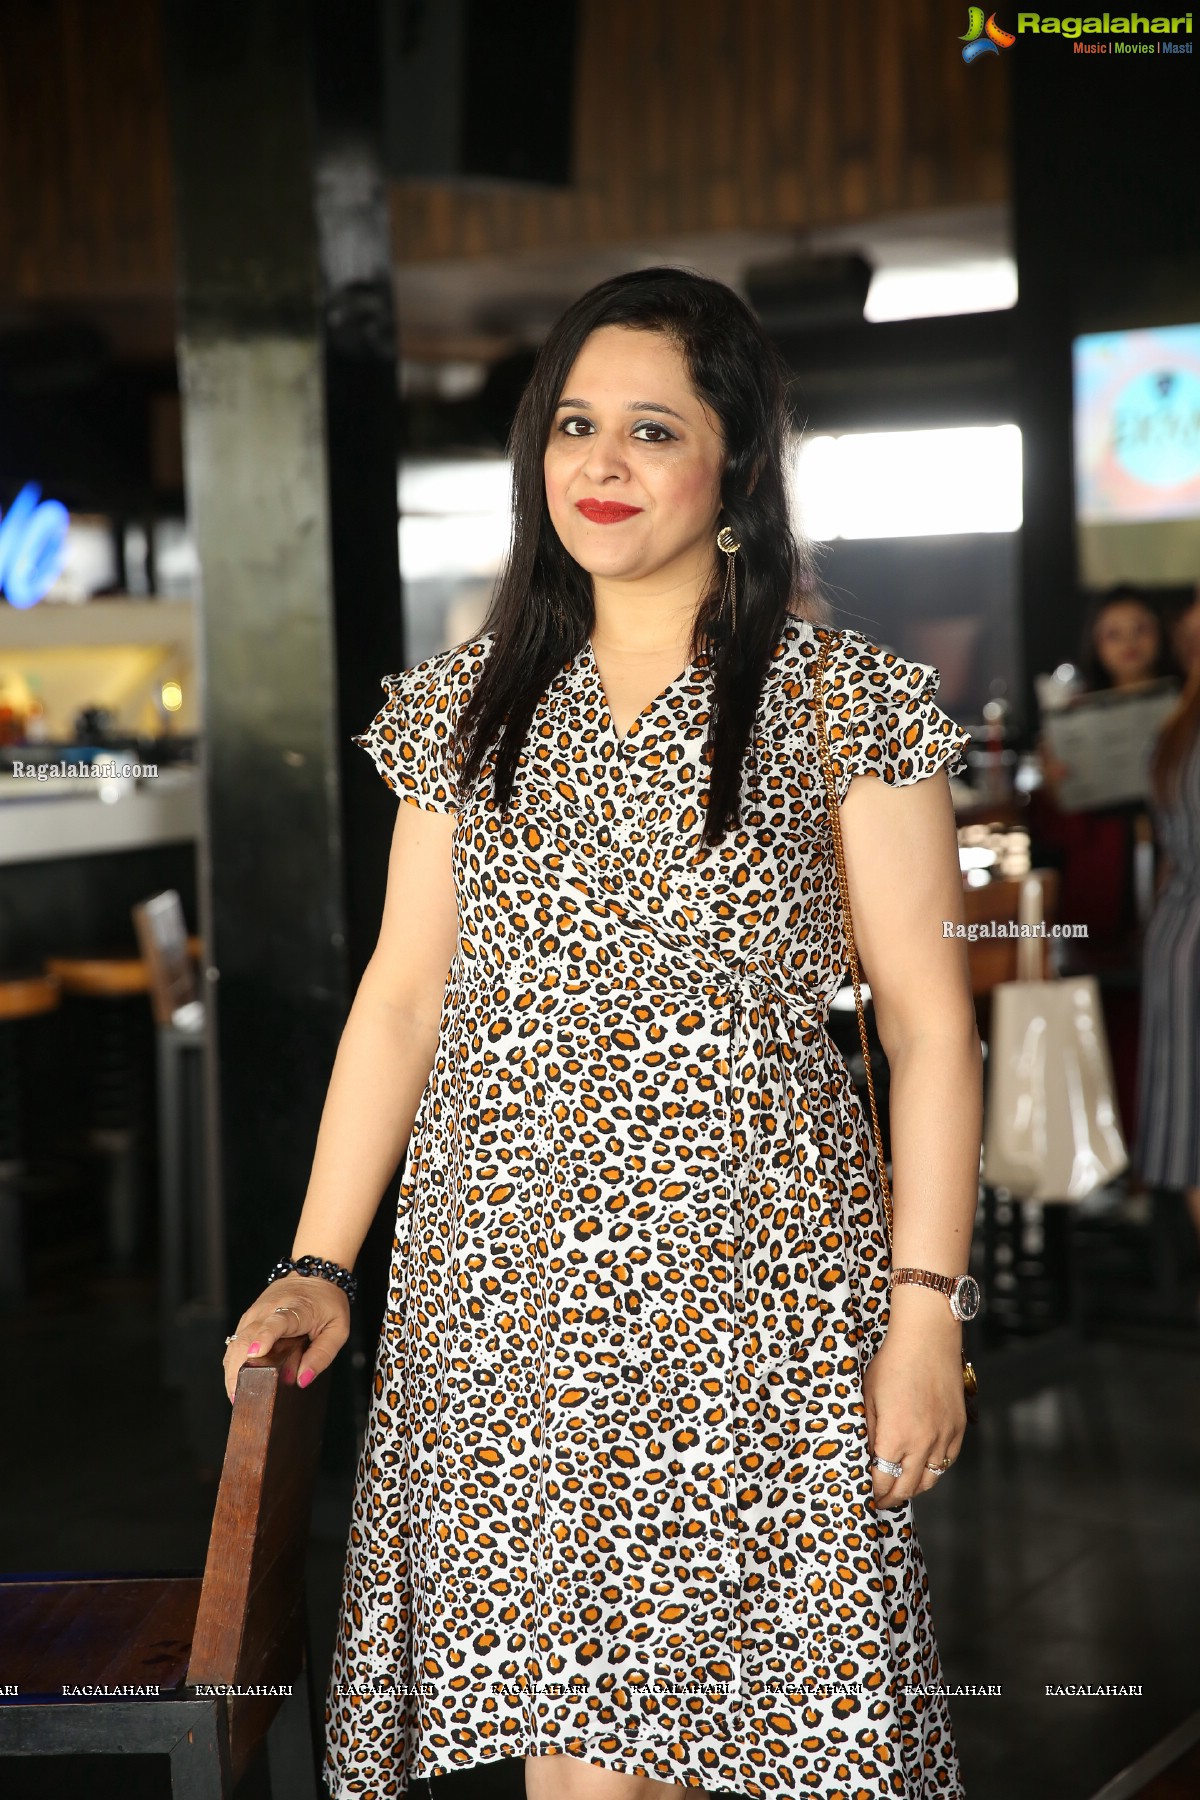 Black Coffee Women's Day Celebrations 2020 at Air Live, Jubilee Hills